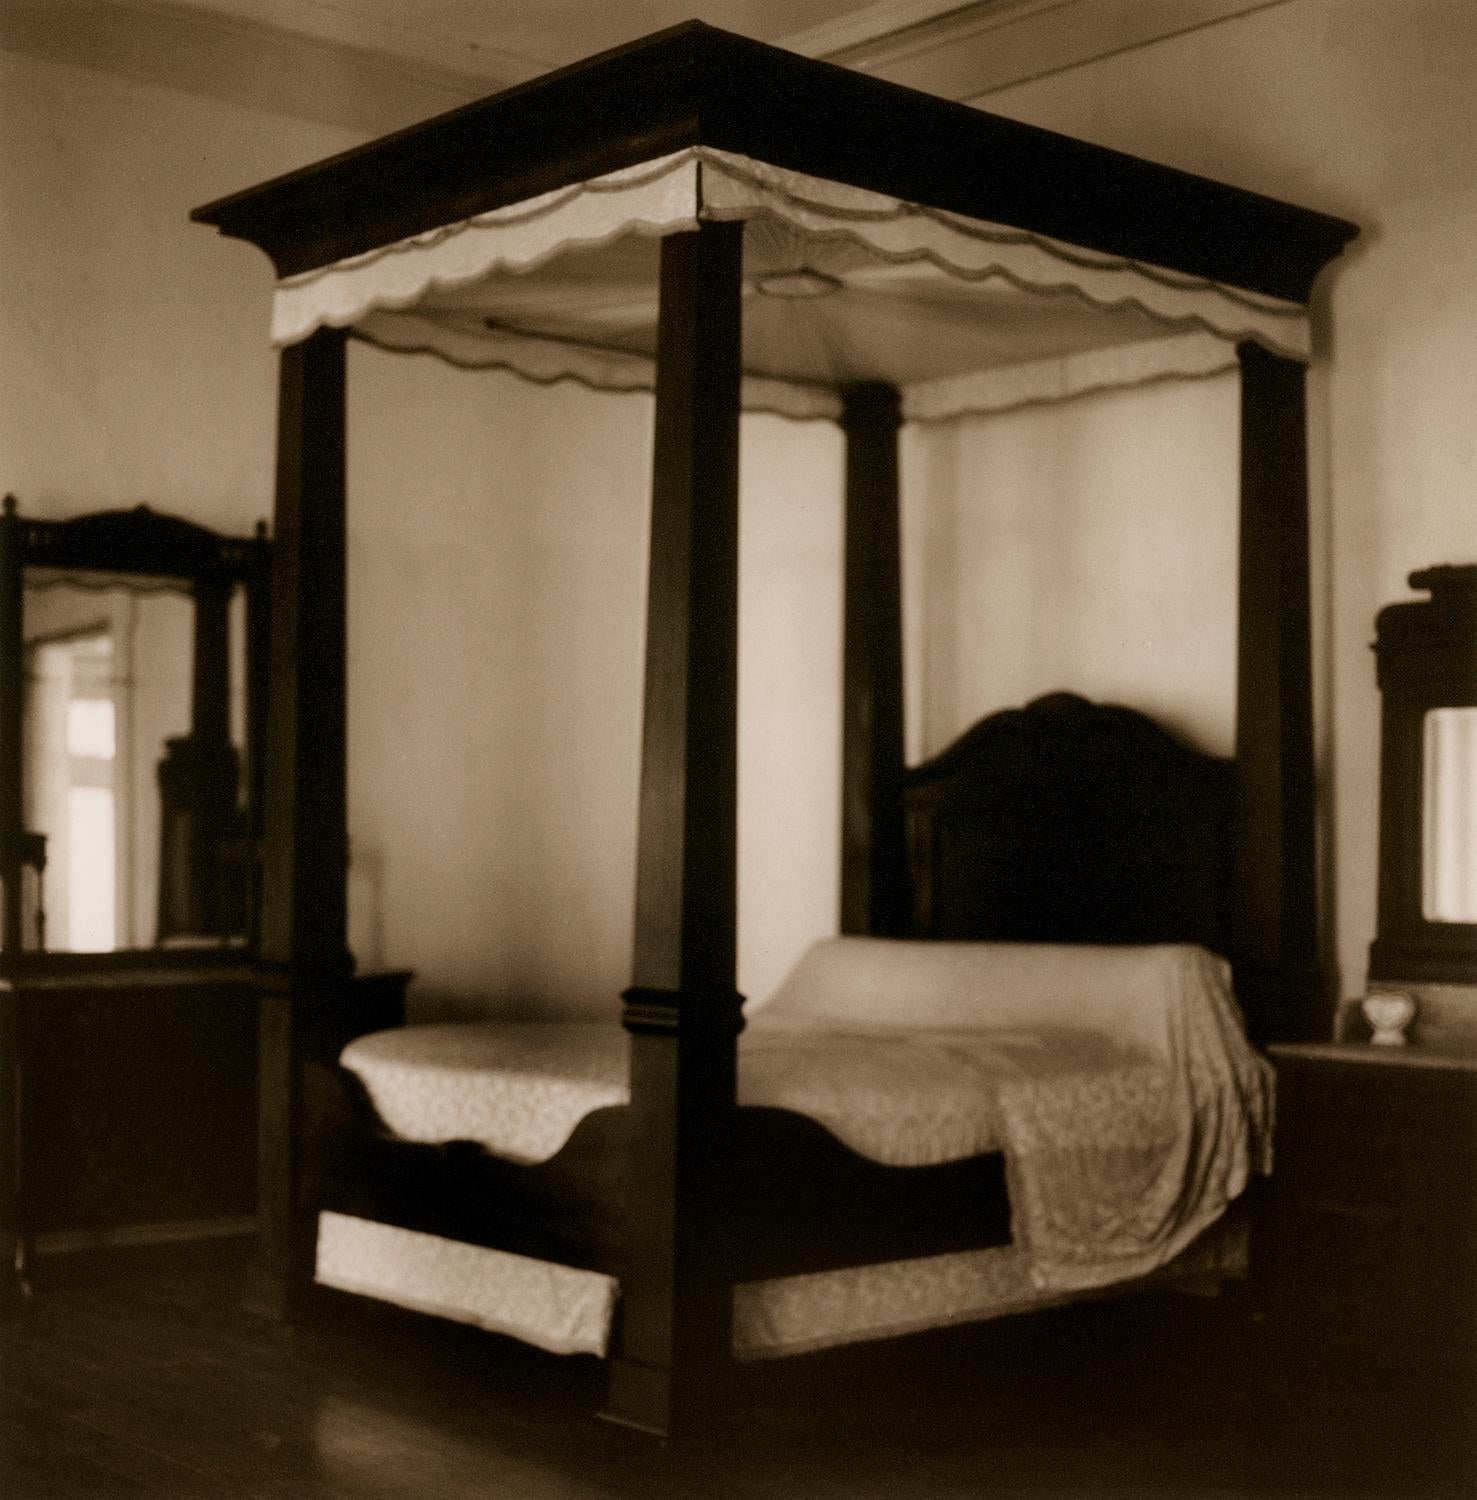 Bed (Sepia Toned Still Life Photo of Mahogany Canopy Bed with Lace Bedspread)